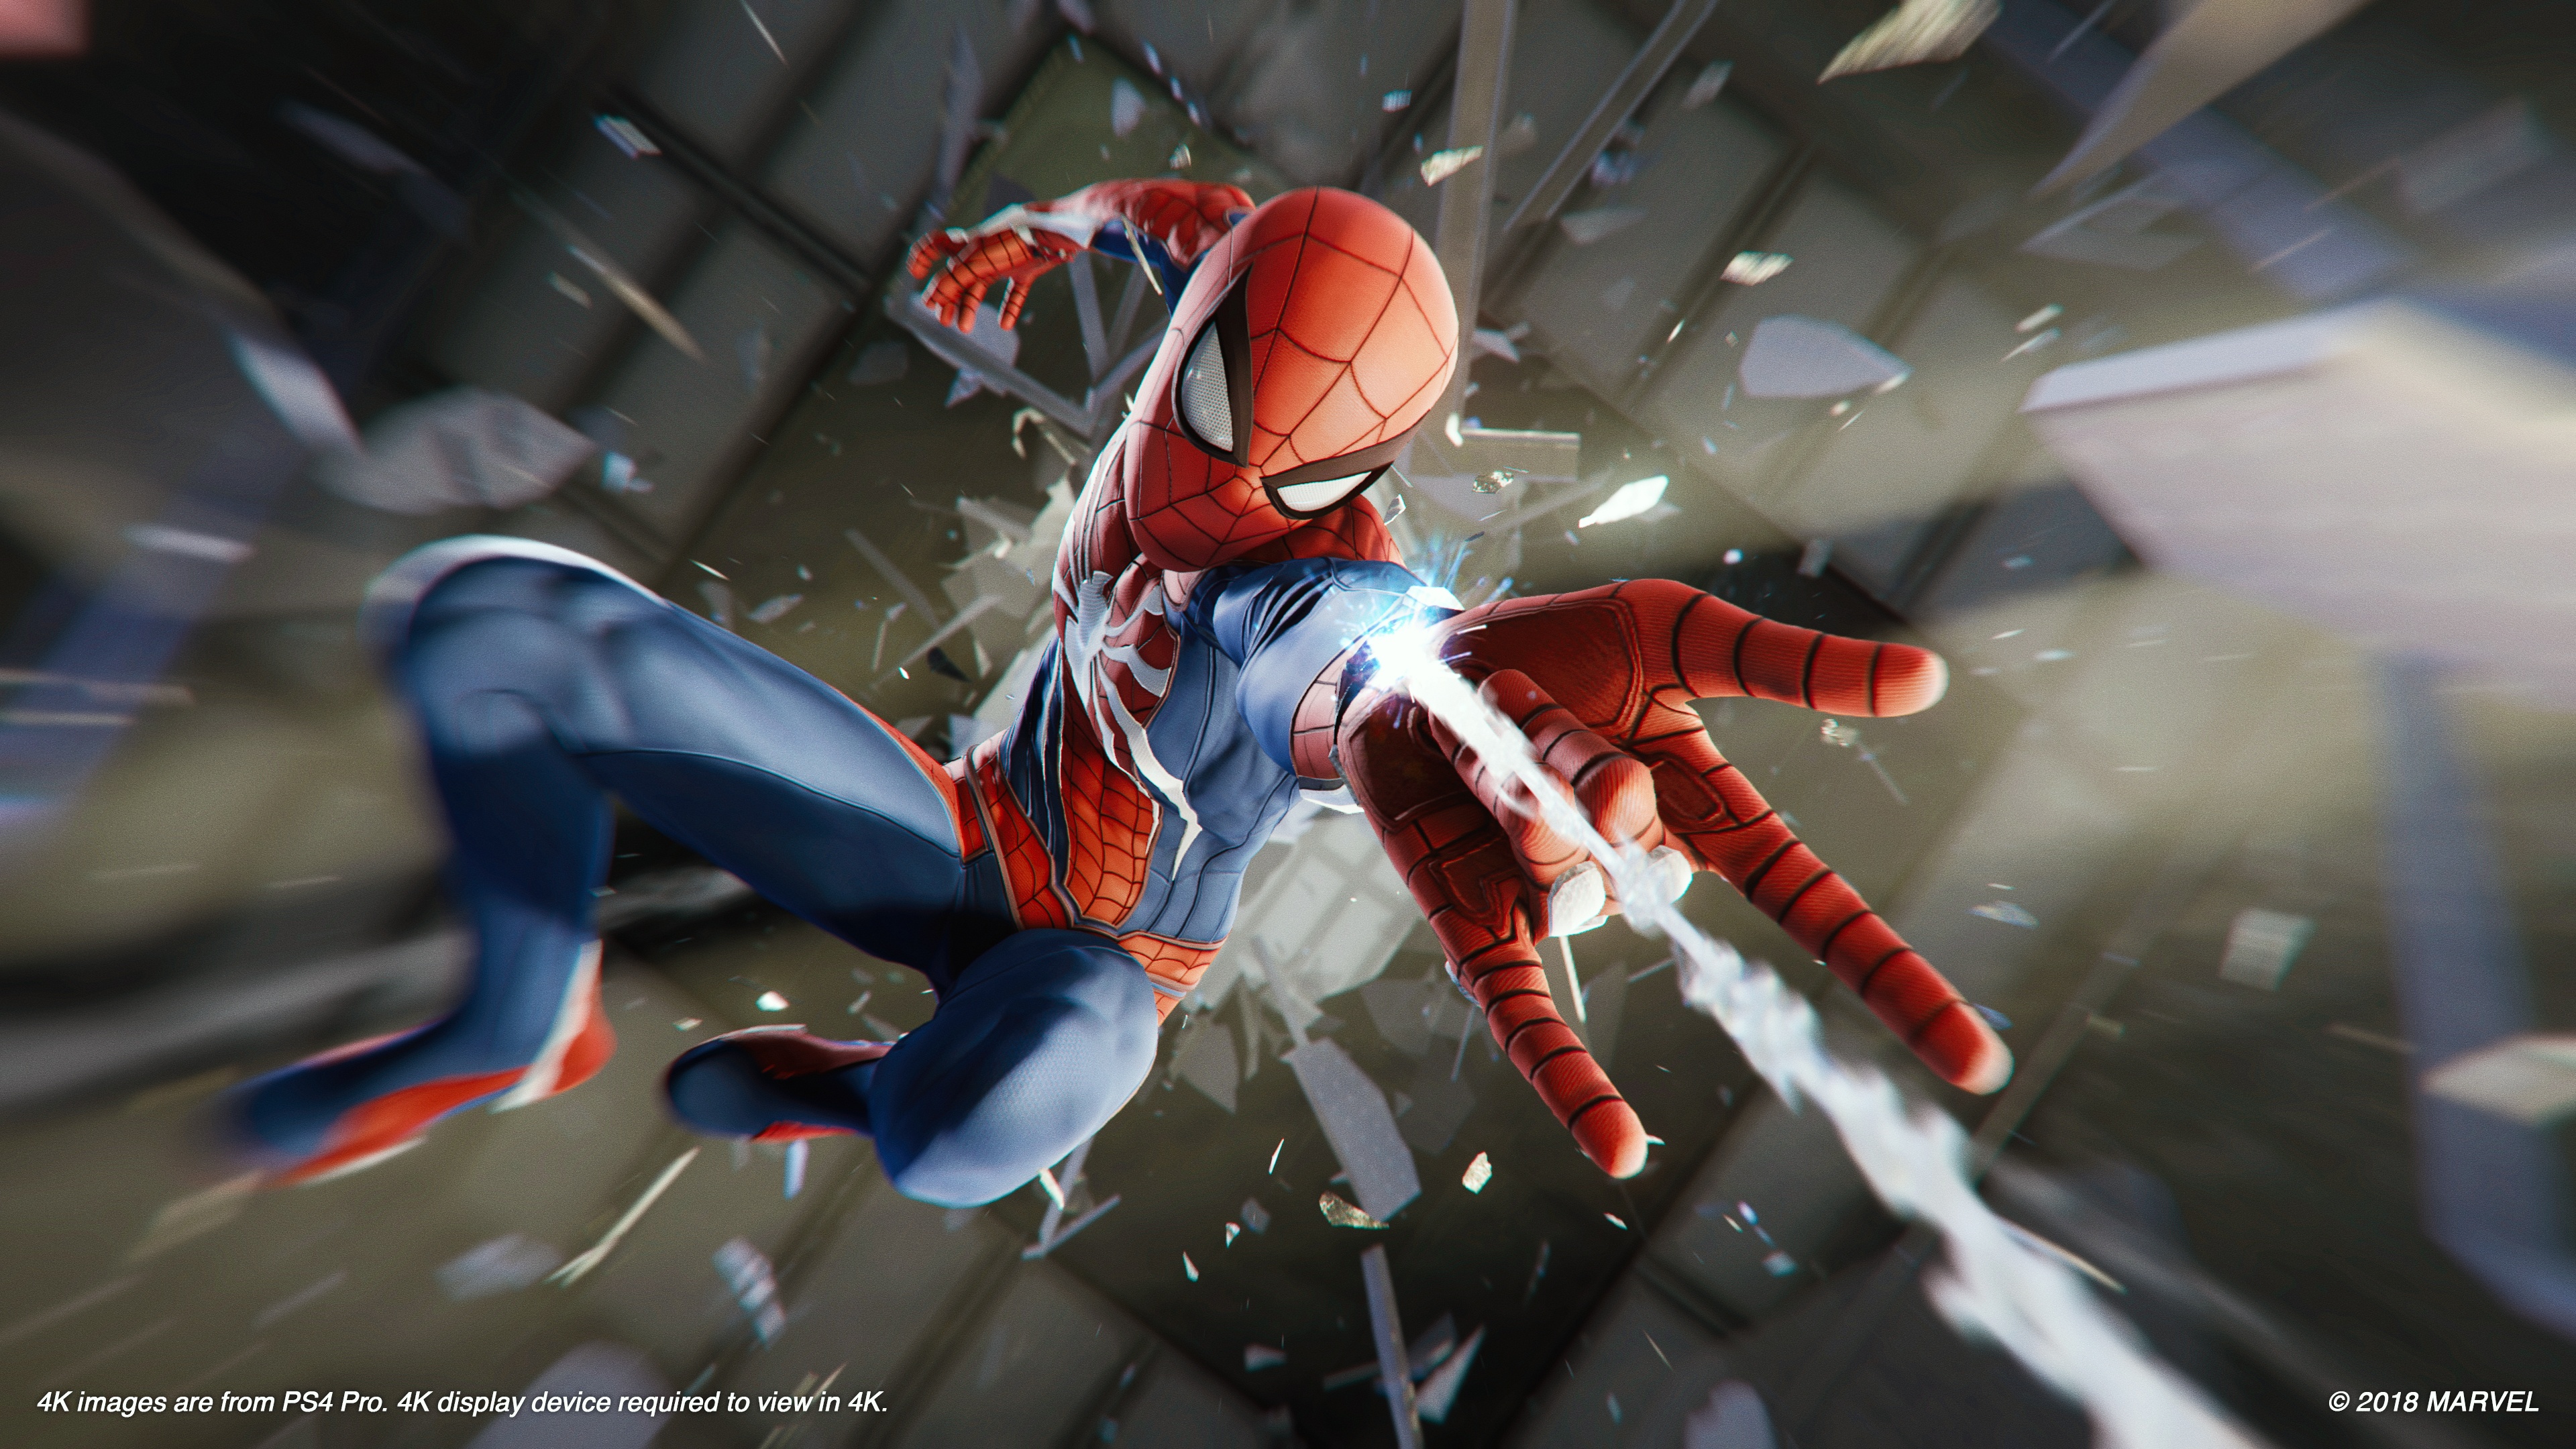 Spider-Man PS4 gameplay launch trailer released